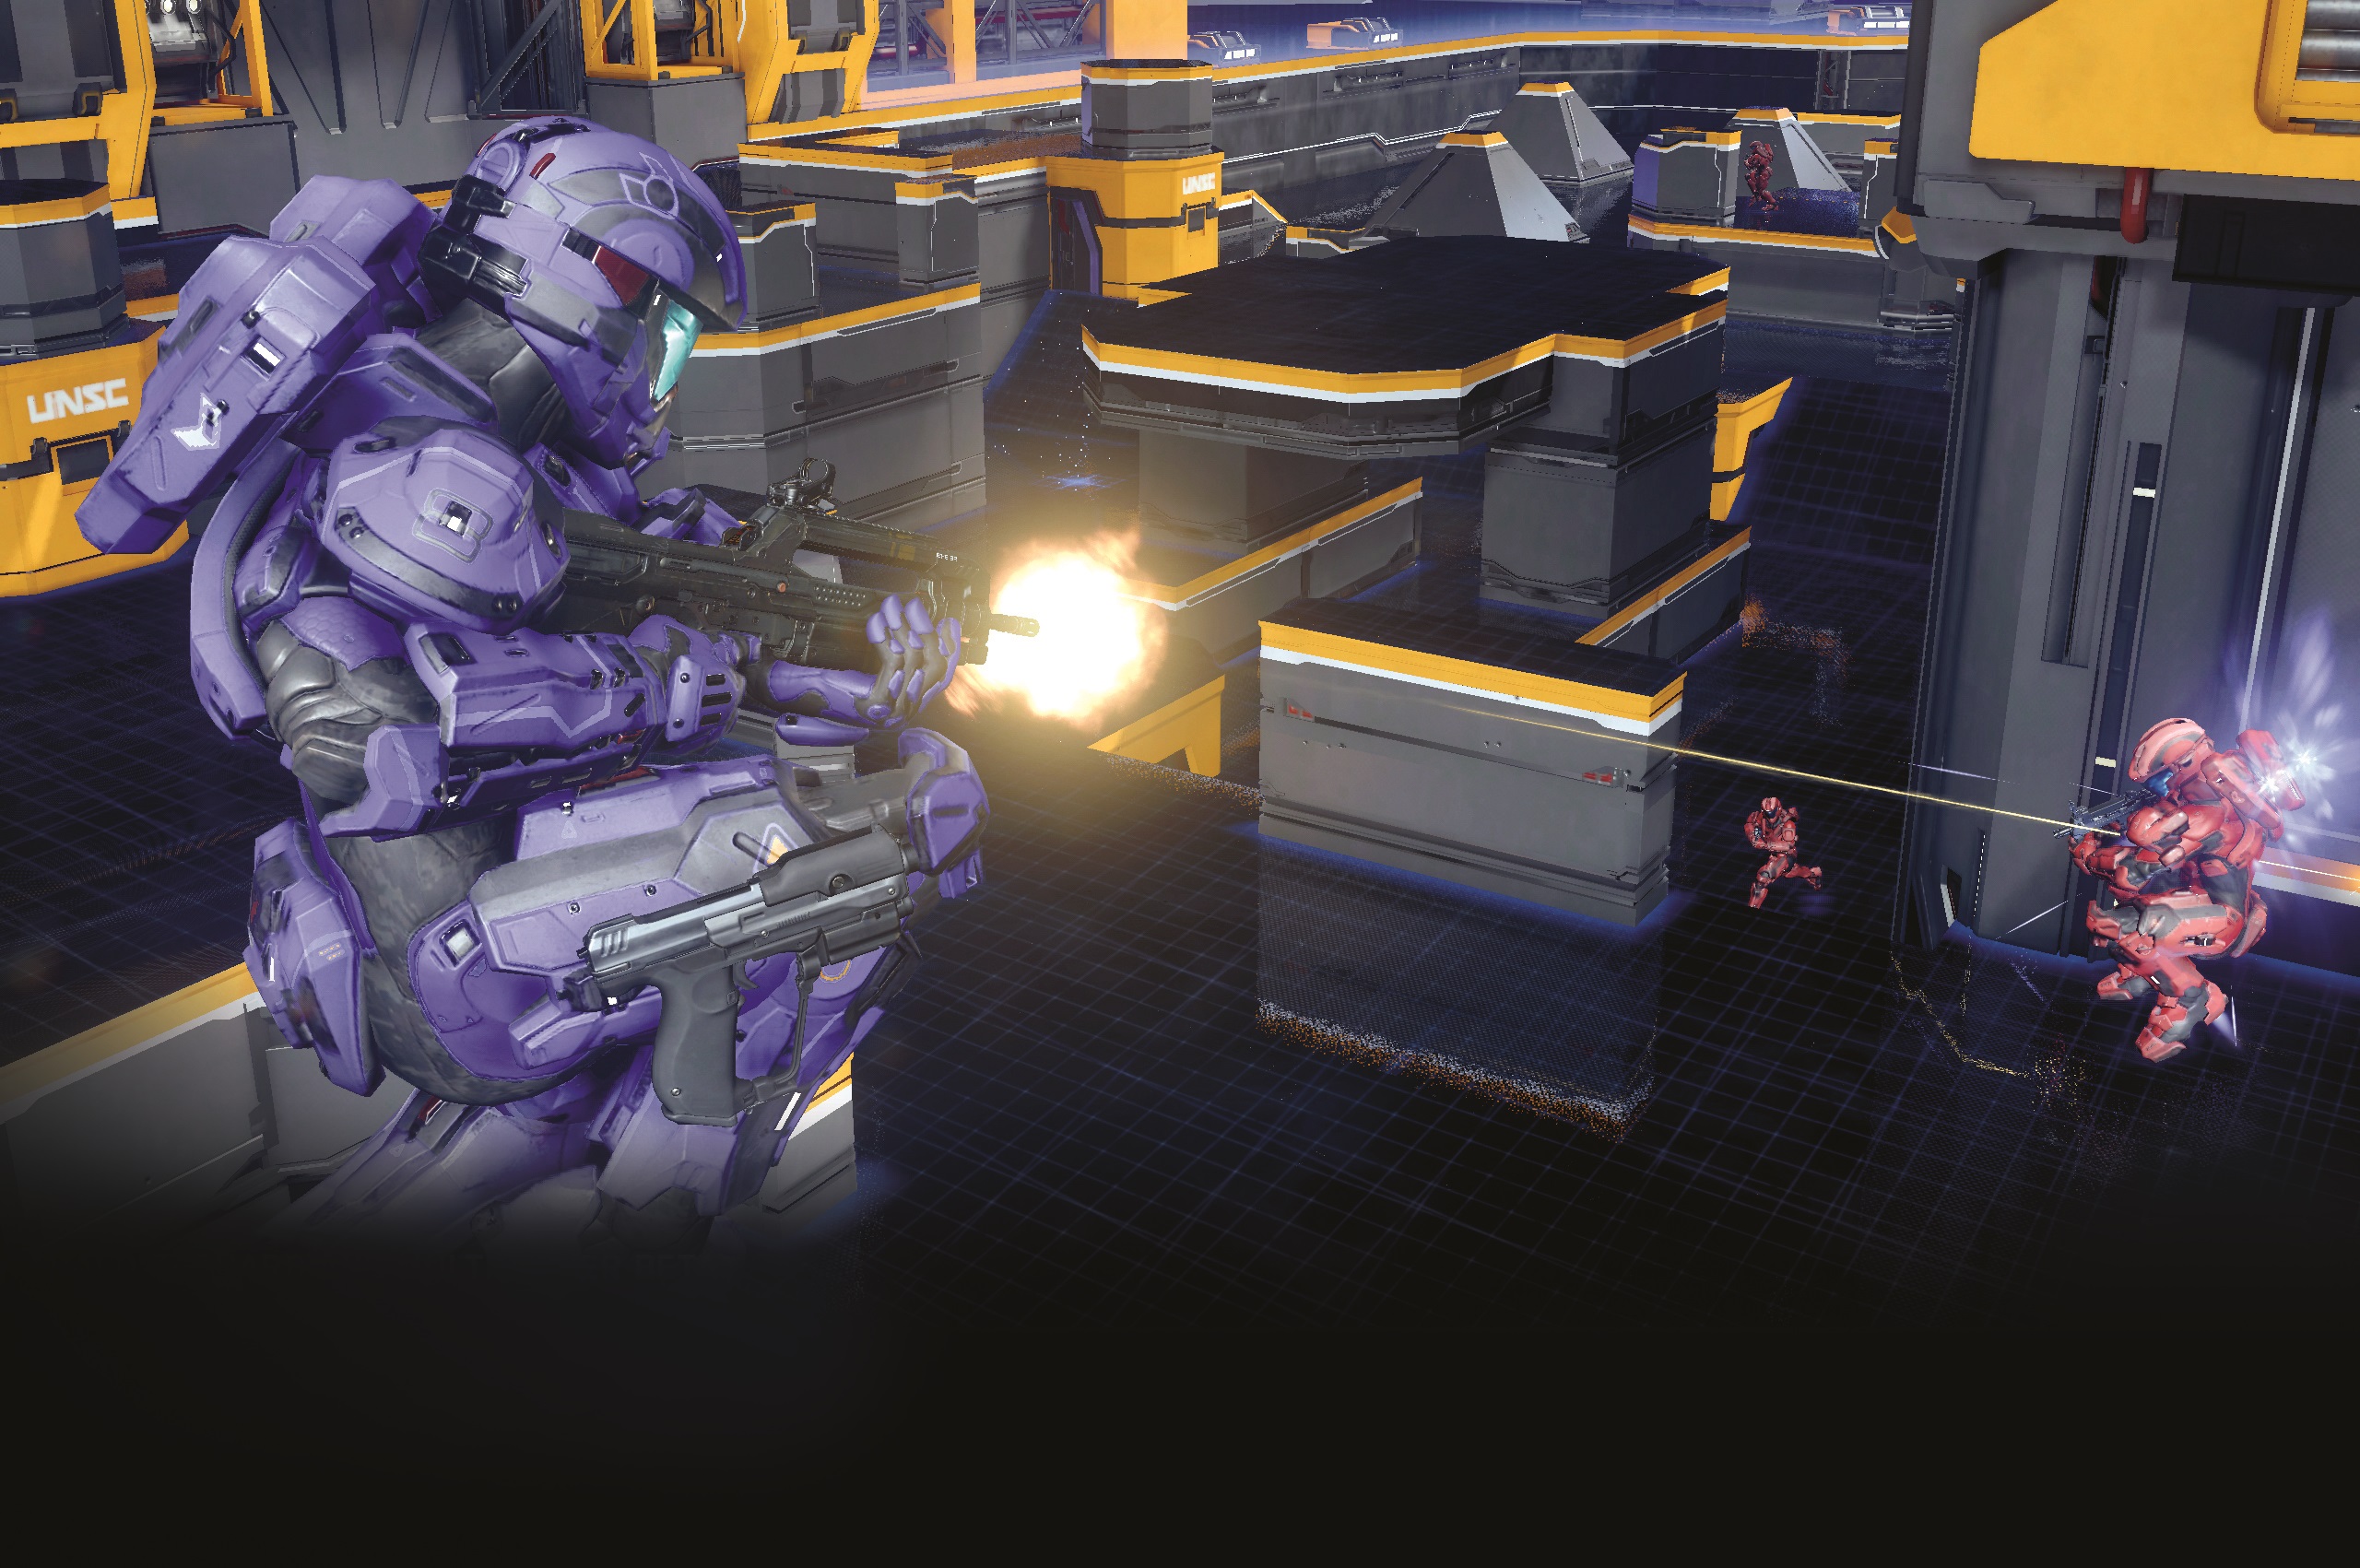 Halo 5: Guardians' Multiplayer Beta Review: A Possible Return To Form